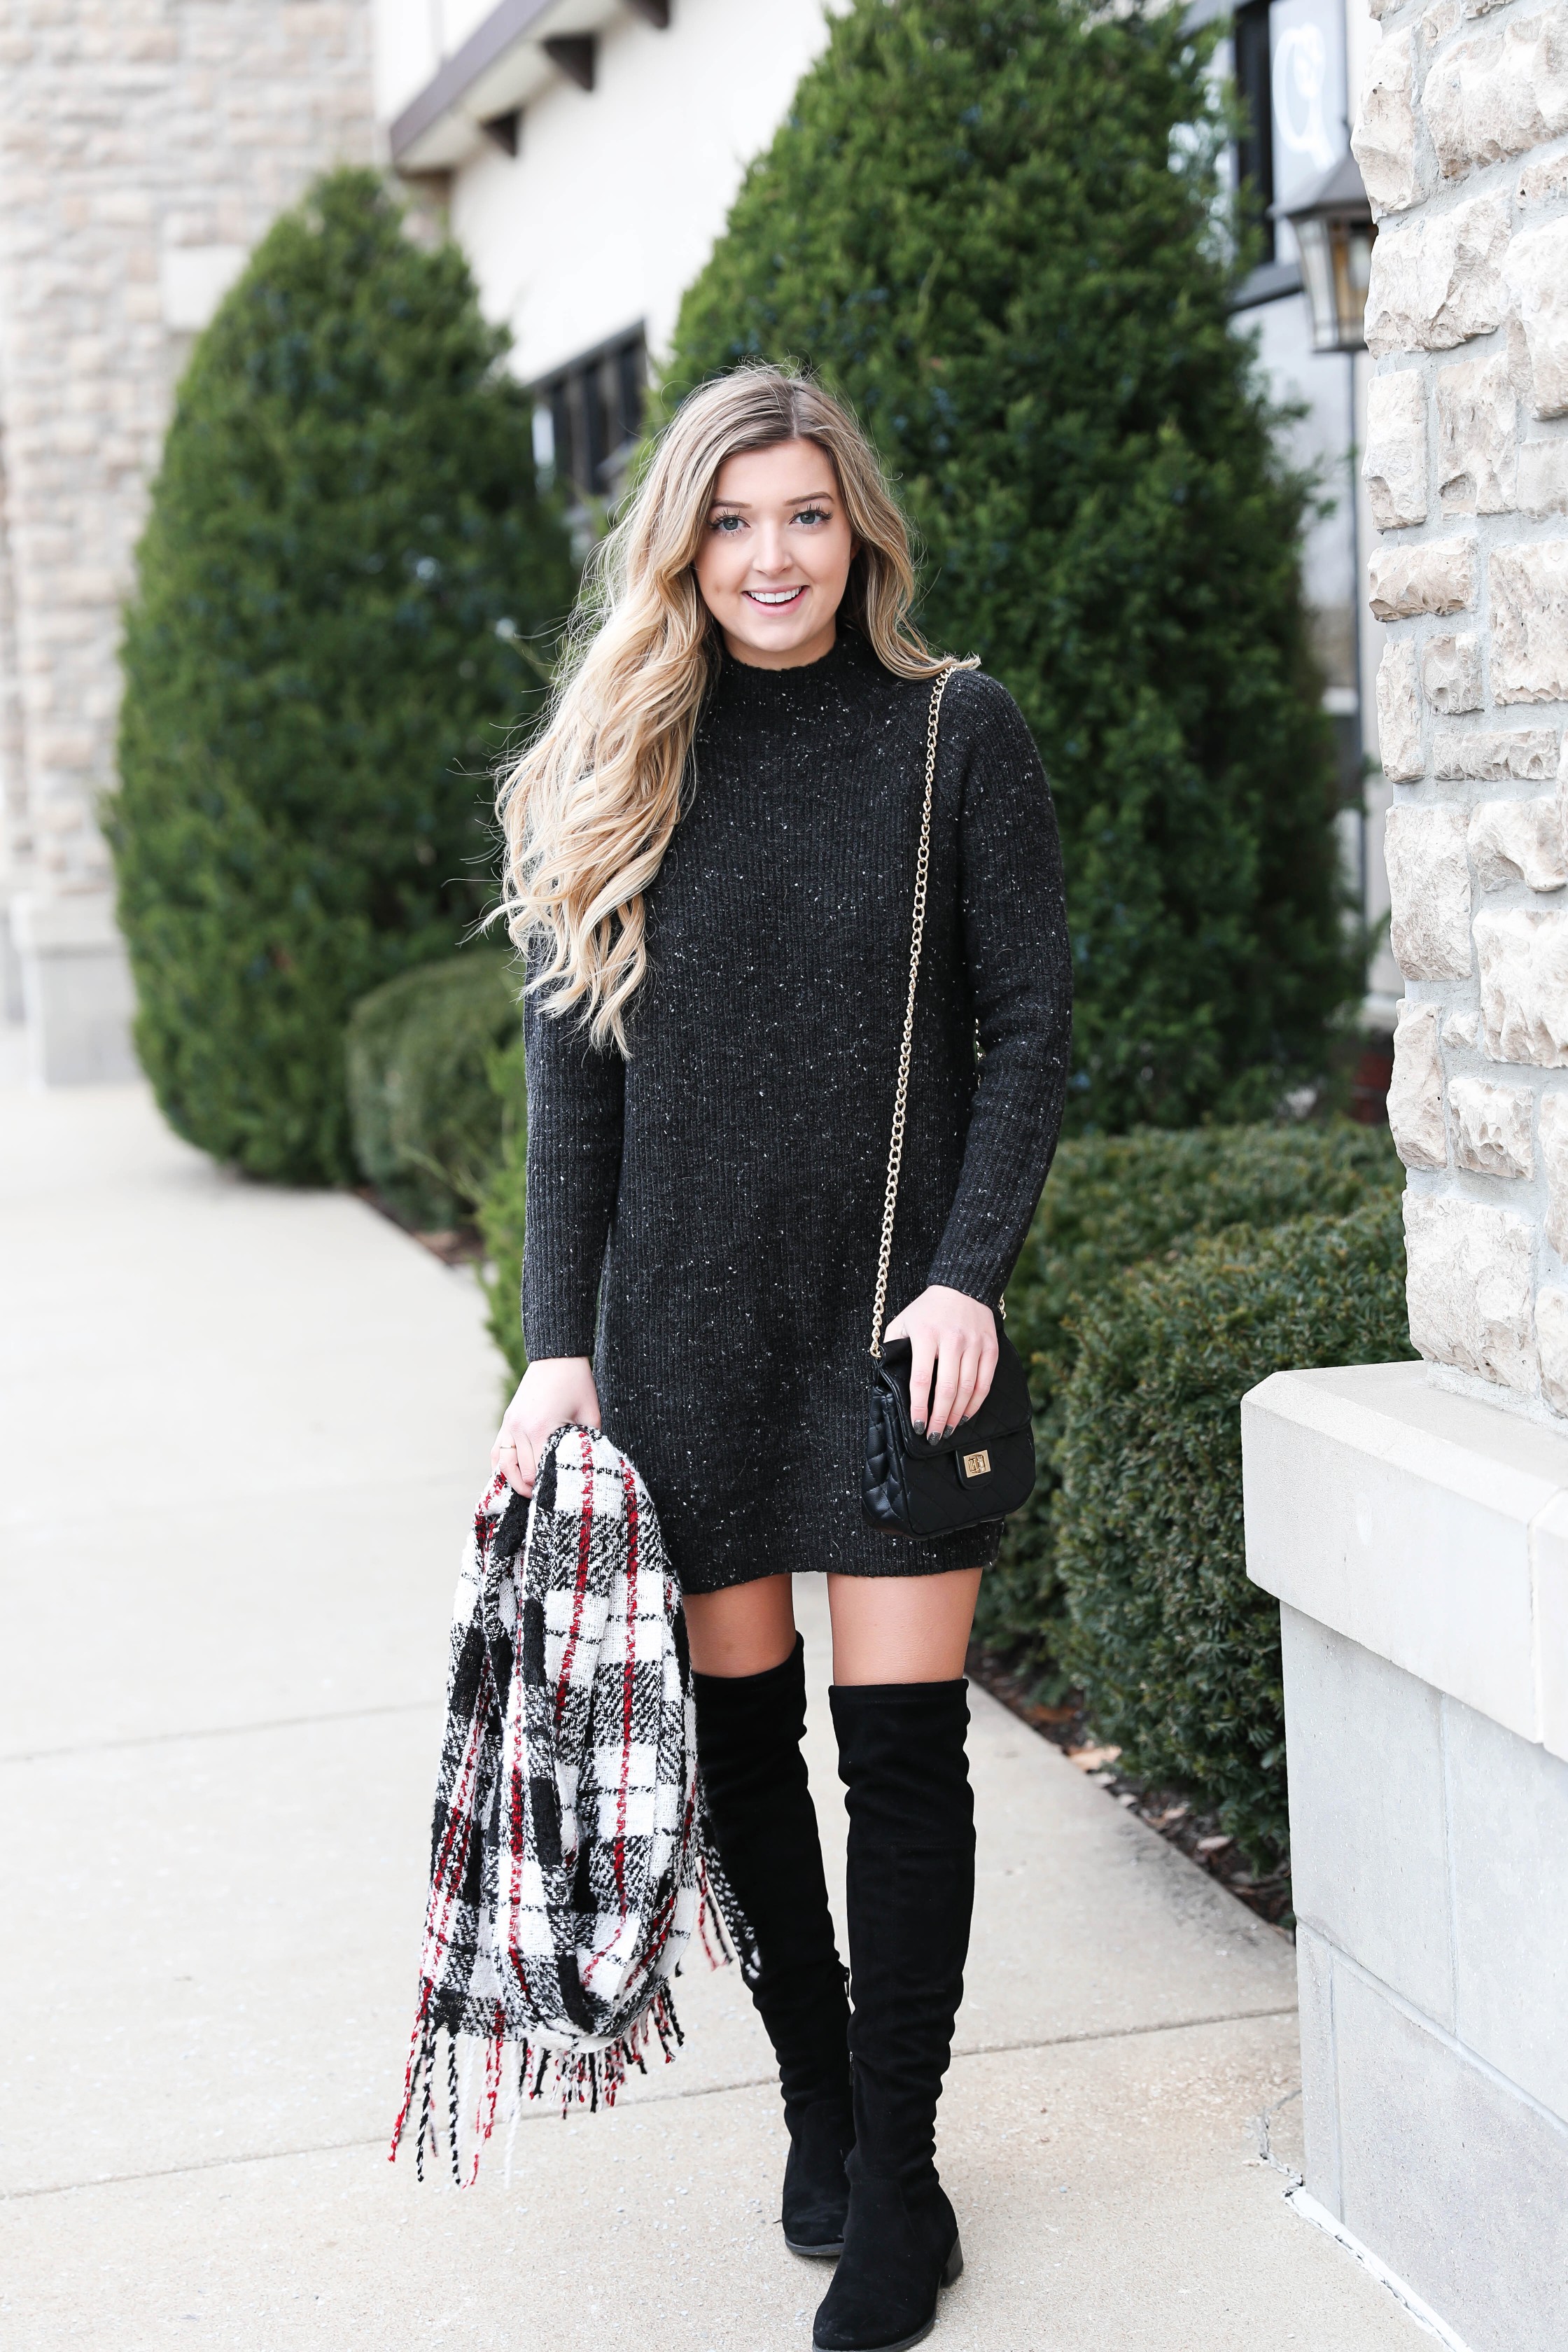 Black sweater dress paired with the cutest red plaid scarf and my favorite black over the knee boots! Cutest curly hair and winter outfit! Details on fashion blog daily dose of charm by lauren lindmark